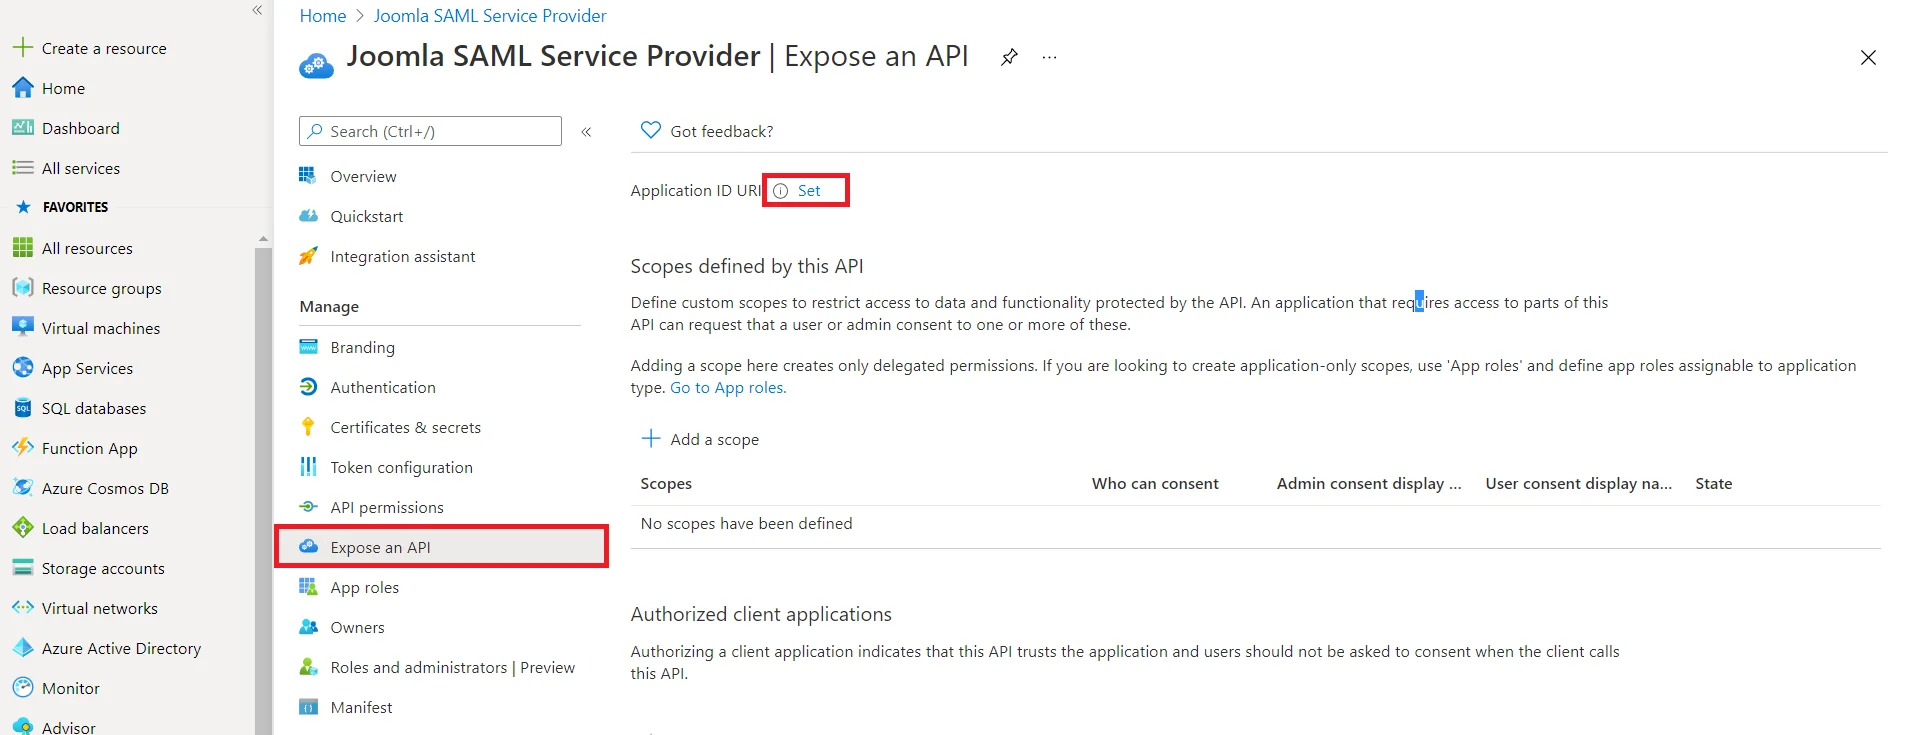 Office 365 ( Microsoft Azure AD) SAML SSO with Office 365 as IDP, Application-Details